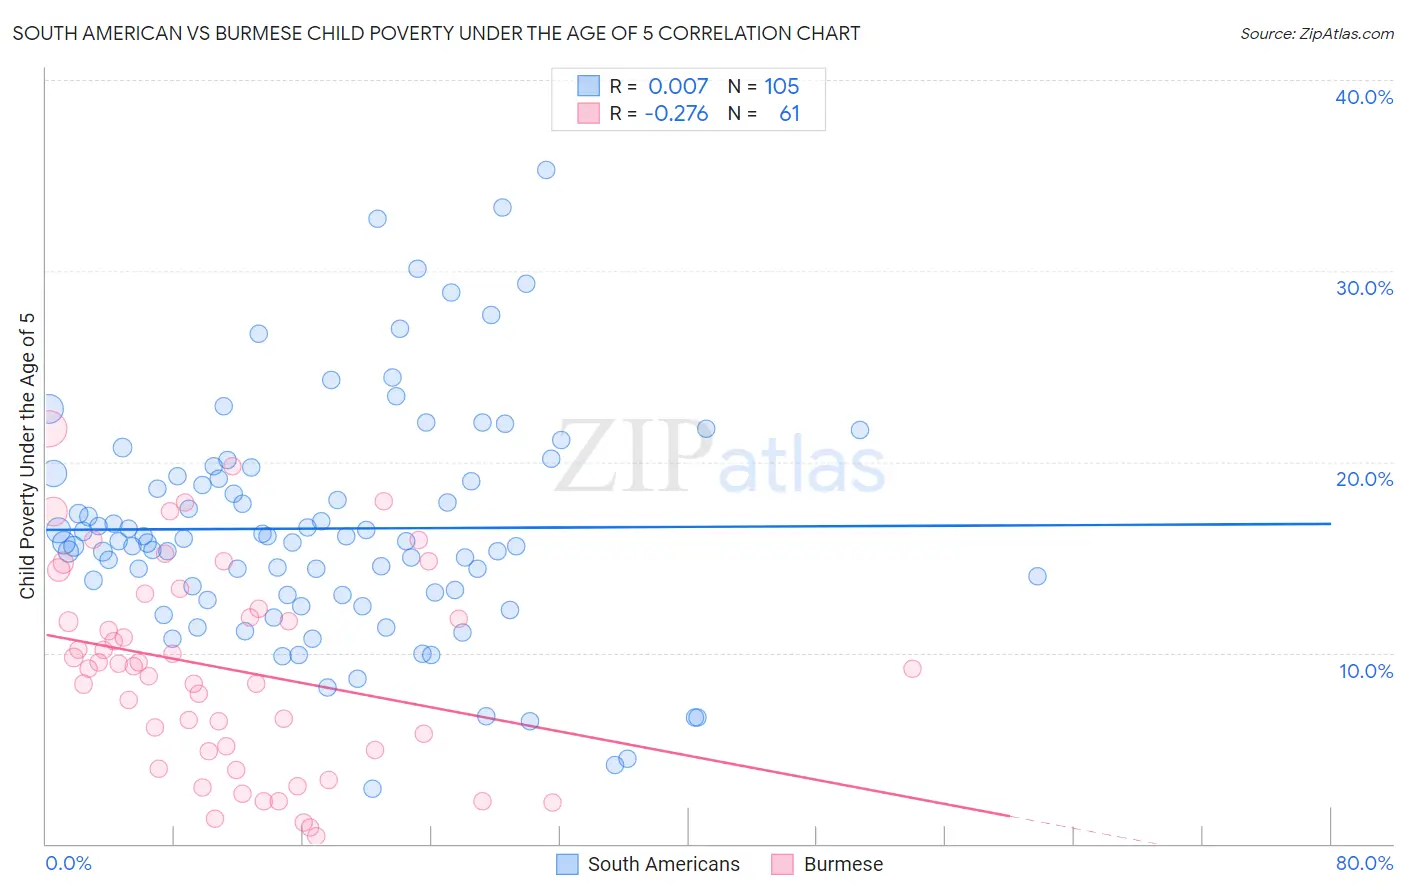 South American vs Burmese Child Poverty Under the Age of 5